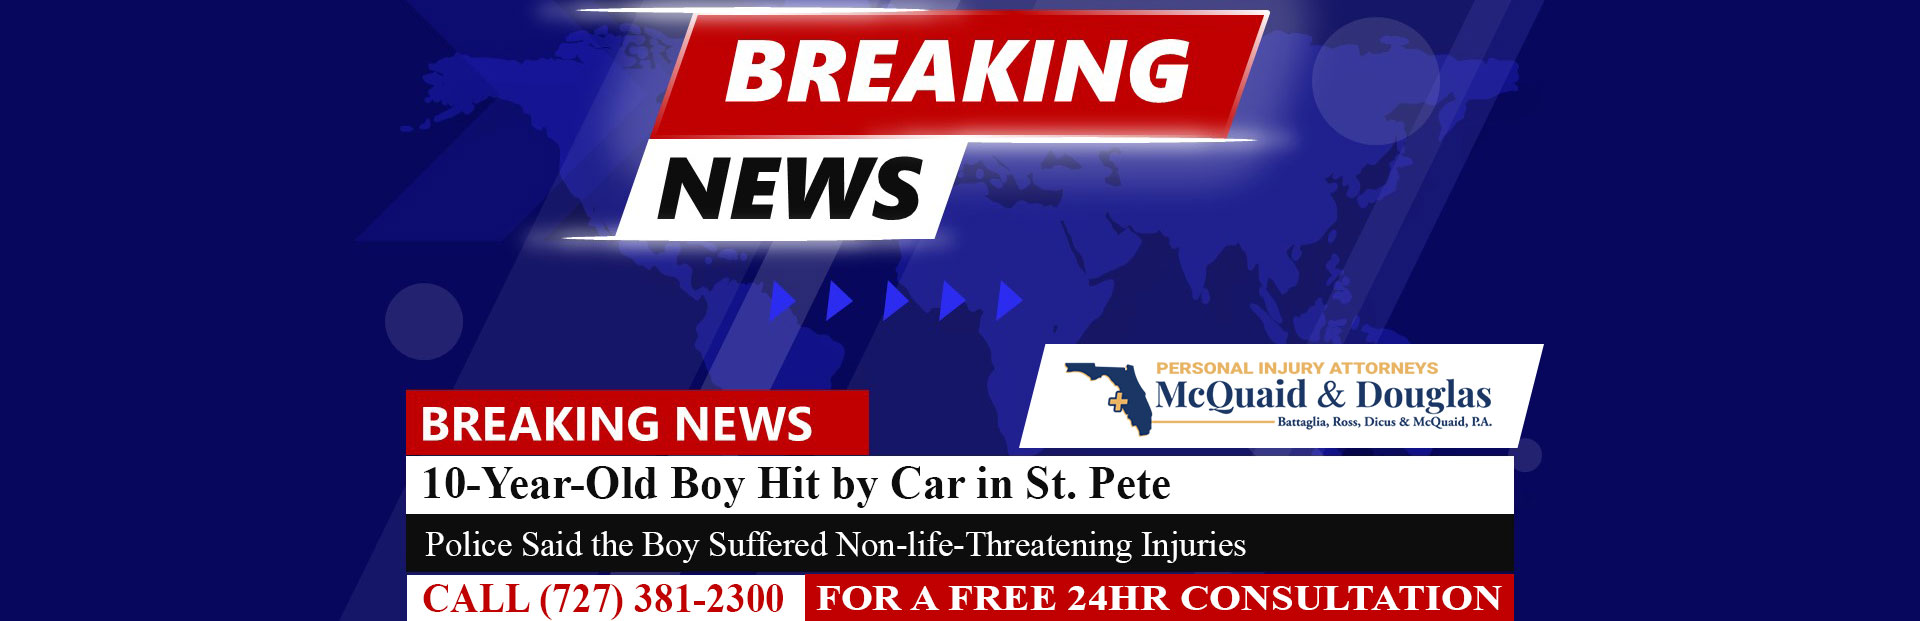 [10-6-22] 10-Year-Old Boy Hit by Car in St. Pete